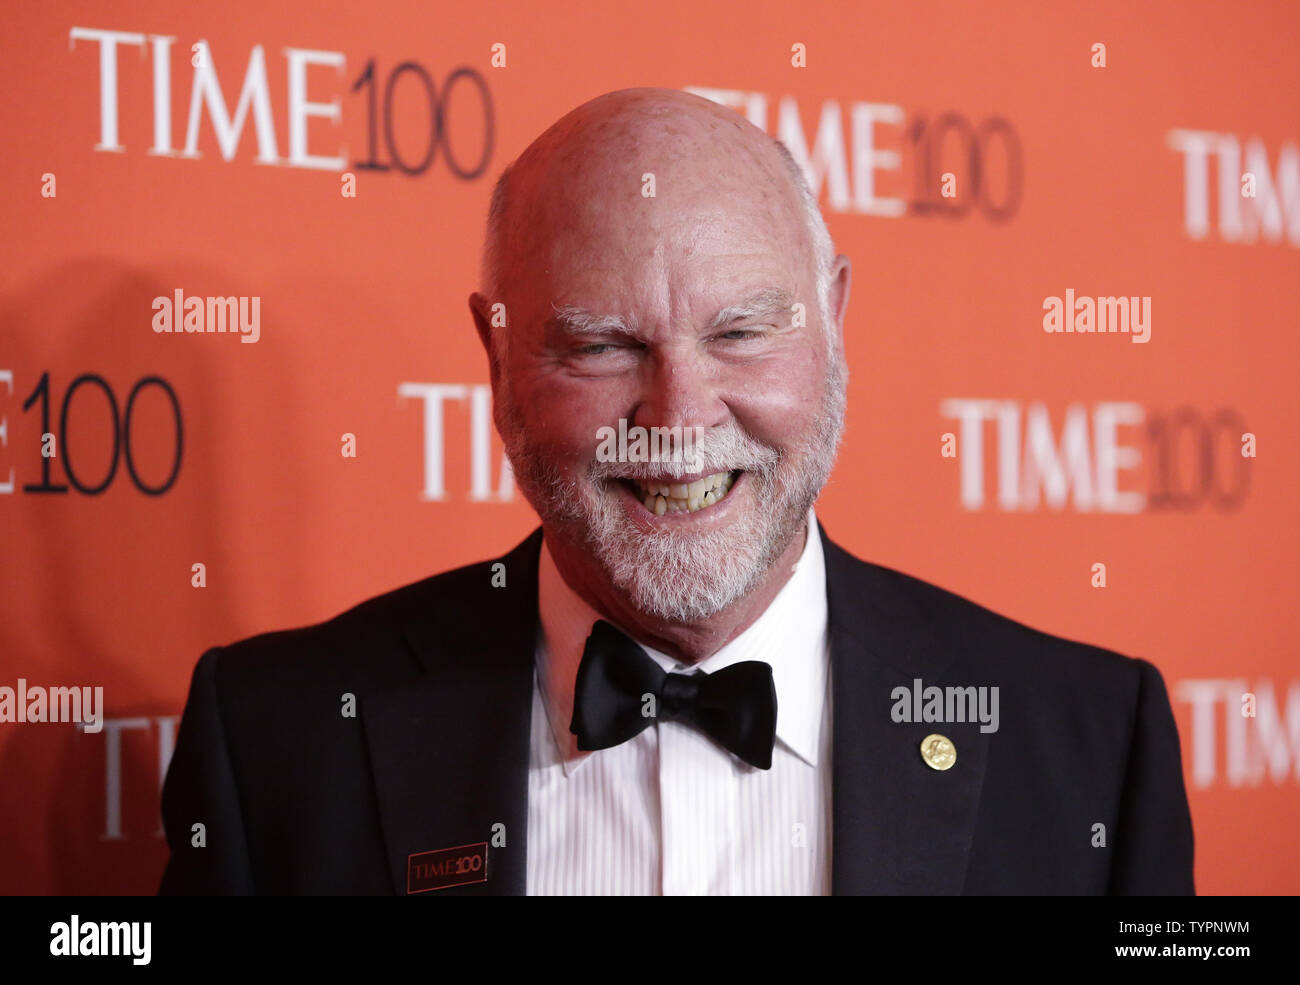 J. Craig Venter arrives on the red carpet at the TIME 100 Gala at Frederick P. Rose Hall, Home of Jazz at Lincoln Center, in New York City on April 21, 2015. TIME 100 celebrates TIME's list of the 100 Most Influential People in the World.   Photo by John Angelillo/UPI Stock Photo